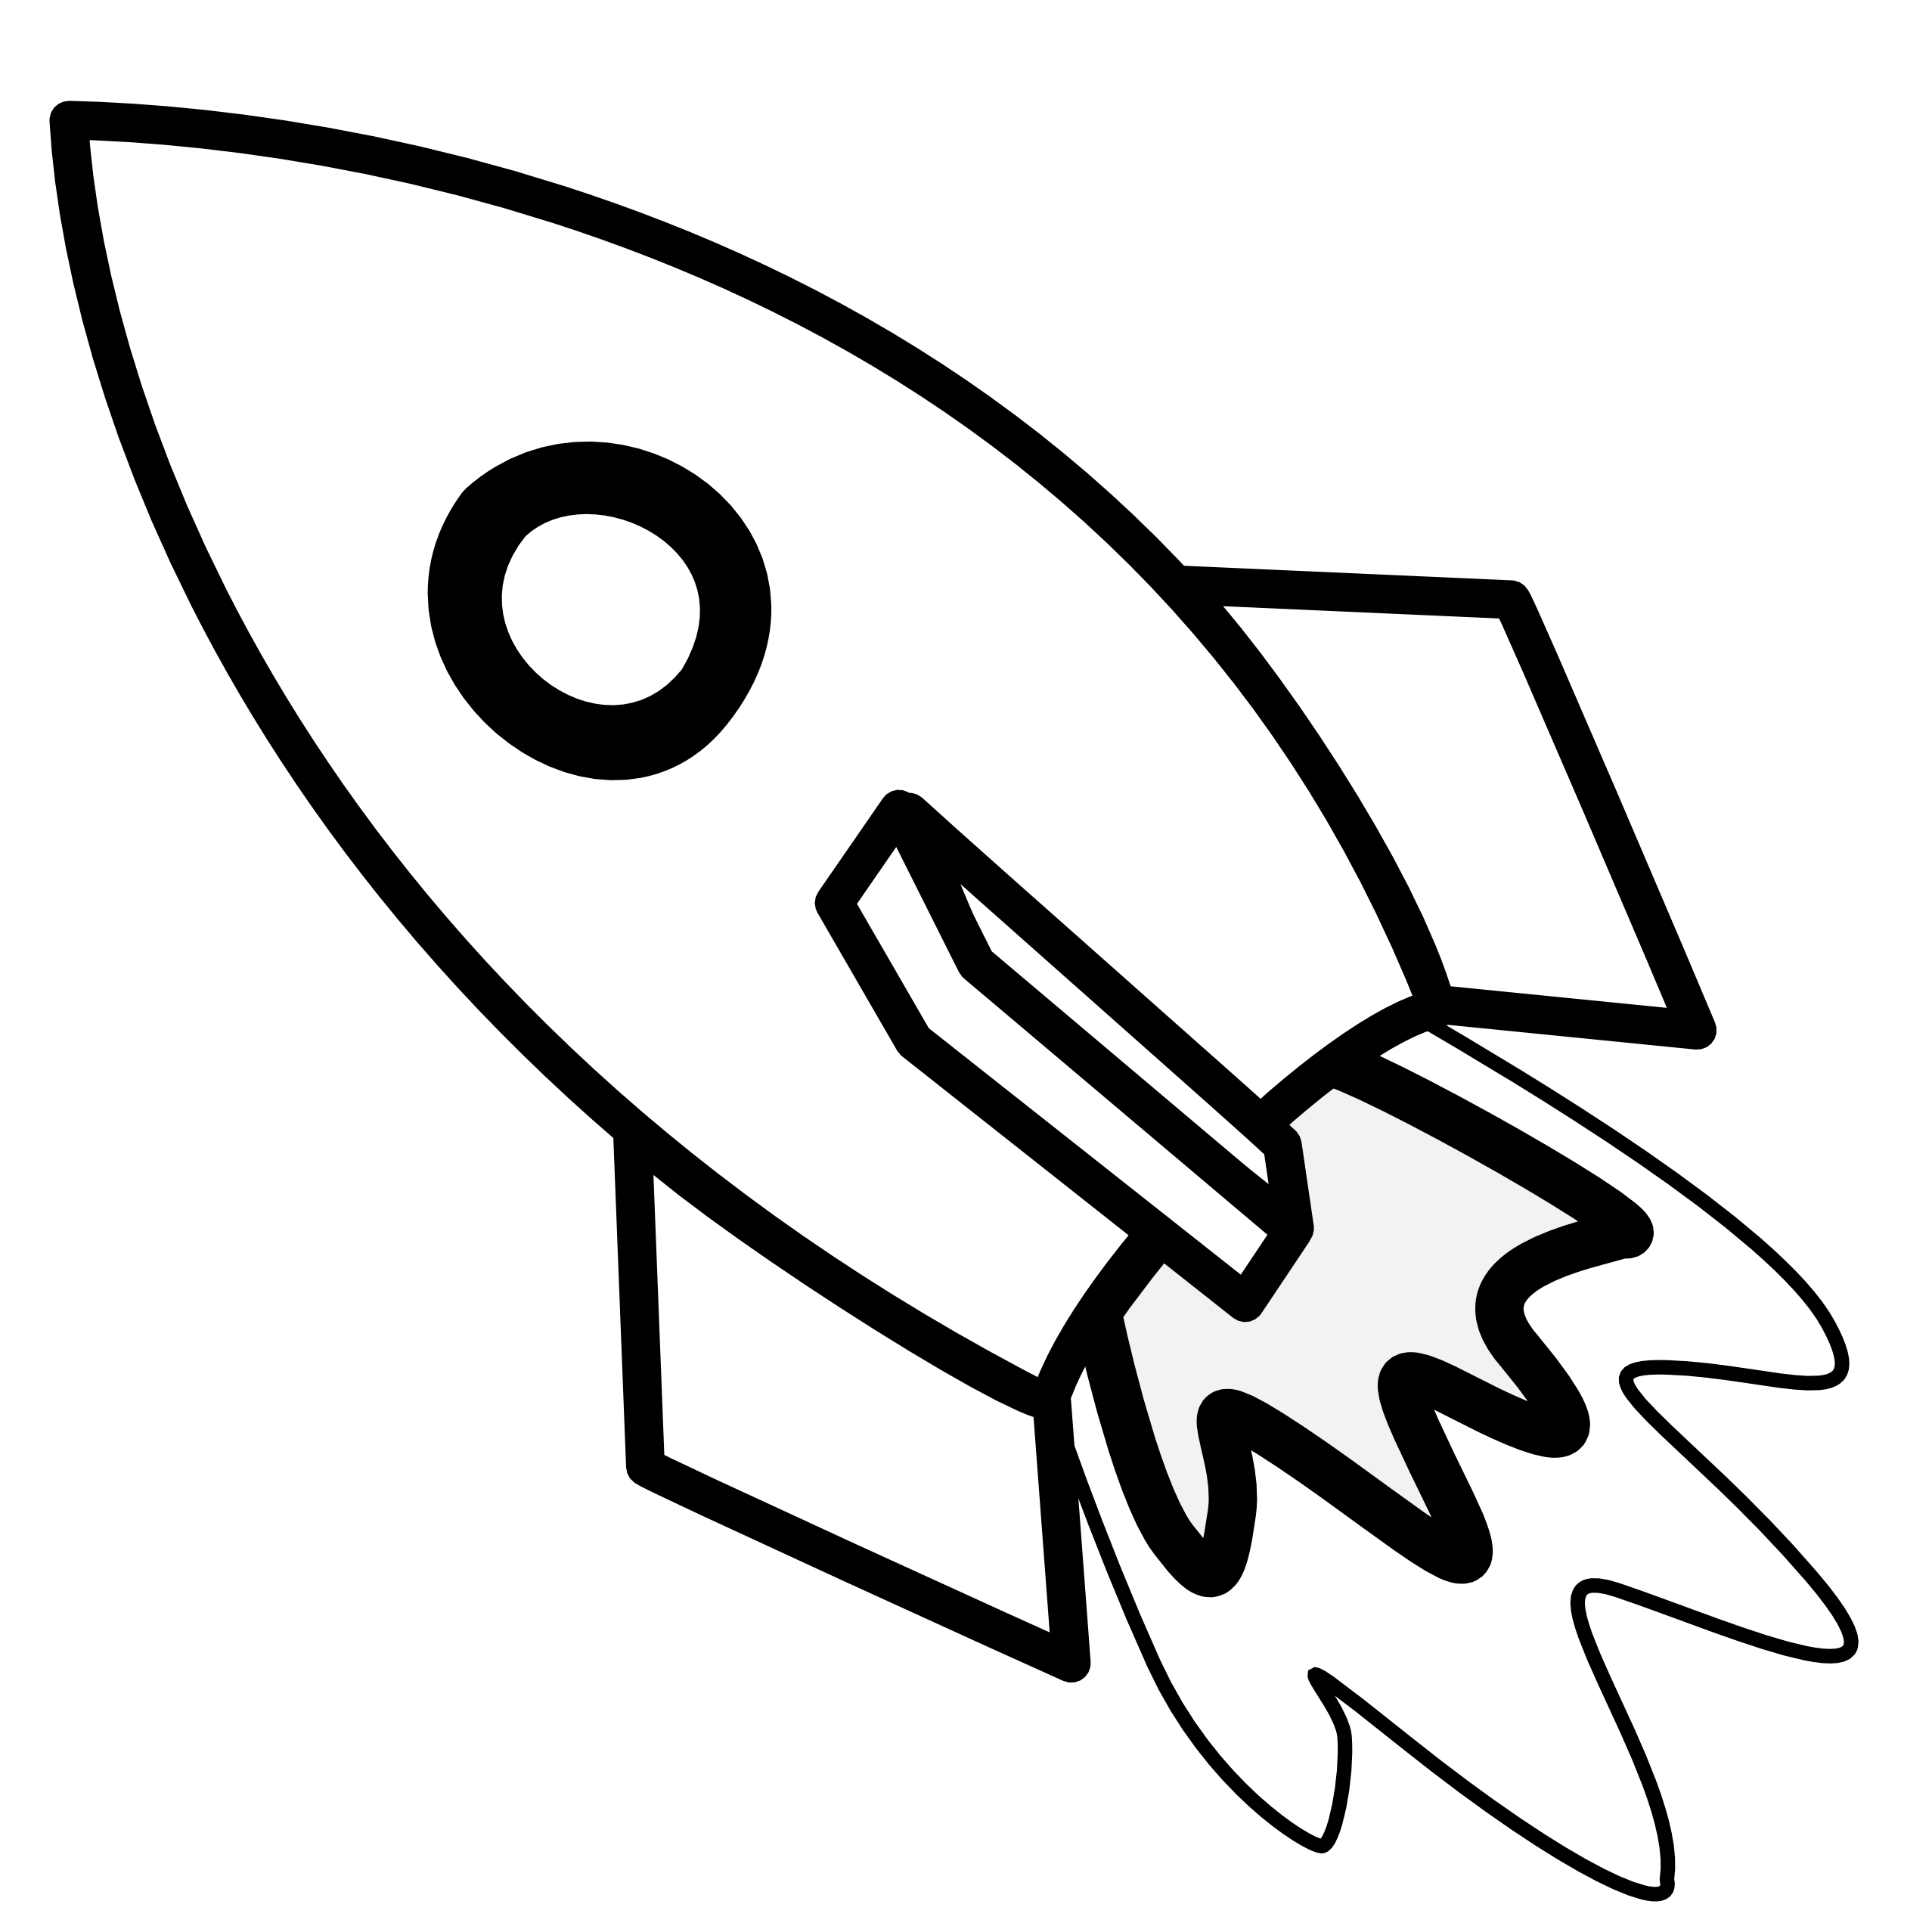 Rocket black and white. Spaceship clipart space ship